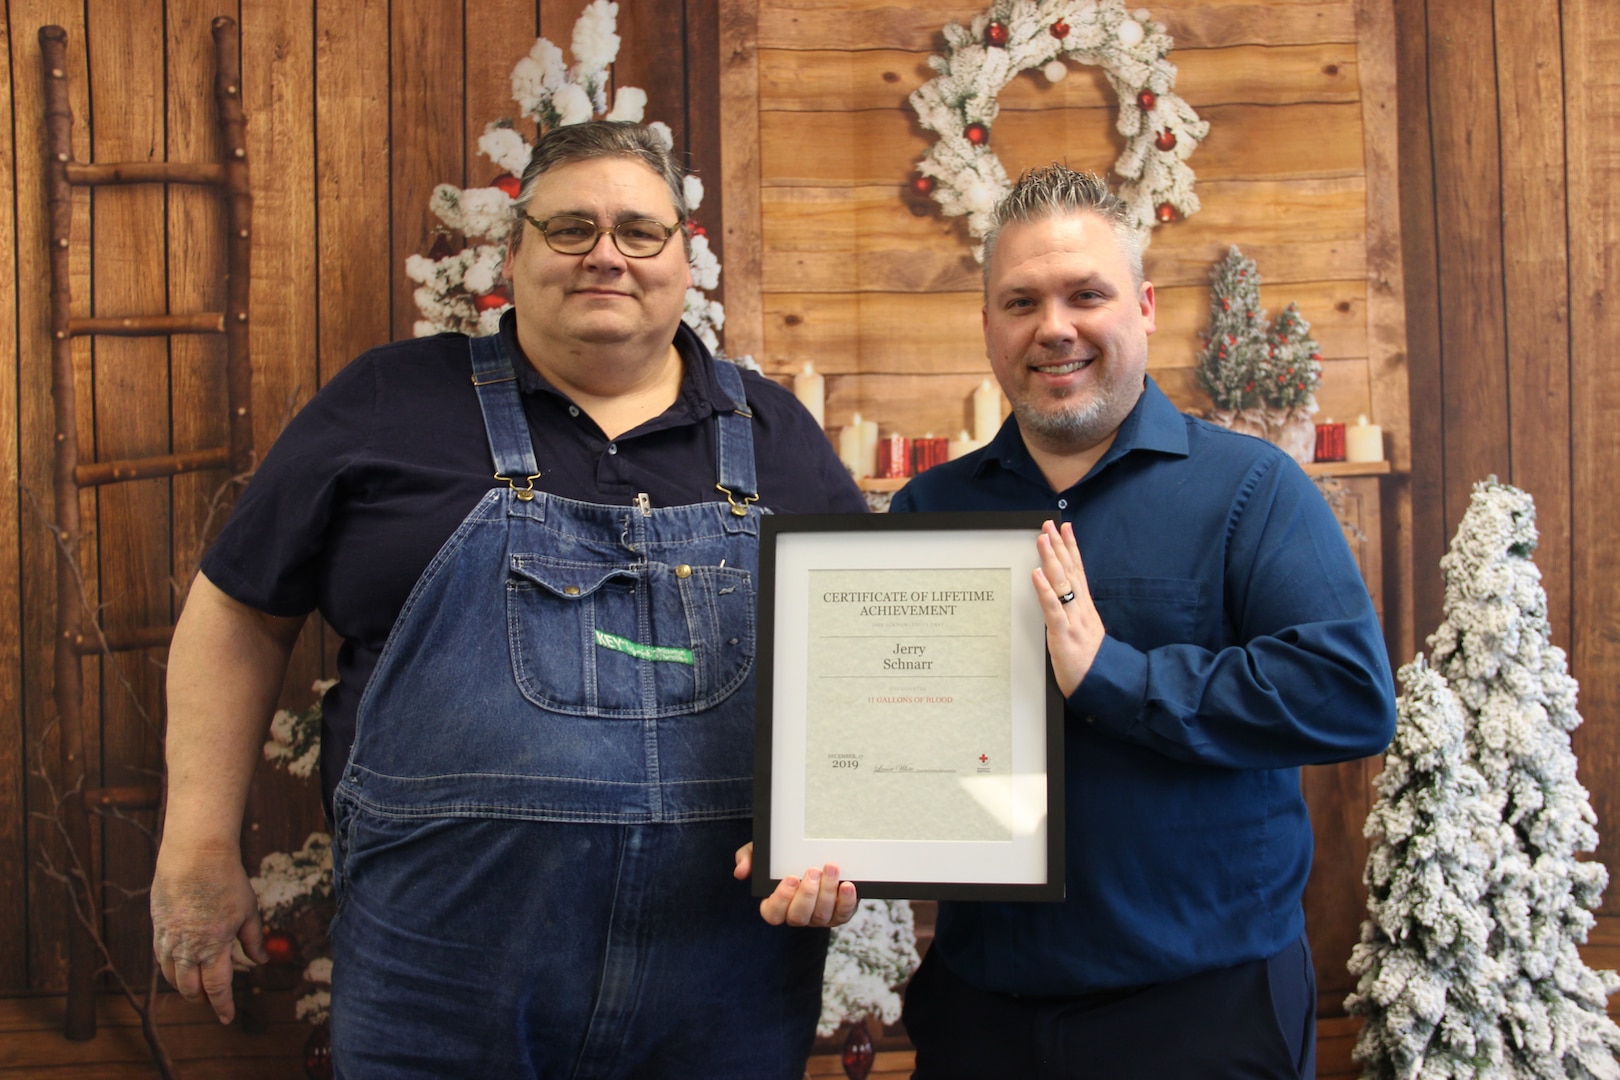 NSWC Crane Employee Jerry Schnarr (left) was recognized by the Red Cross's Lance White (right) for donating more than 11 gallons of blood during his lifetime so far